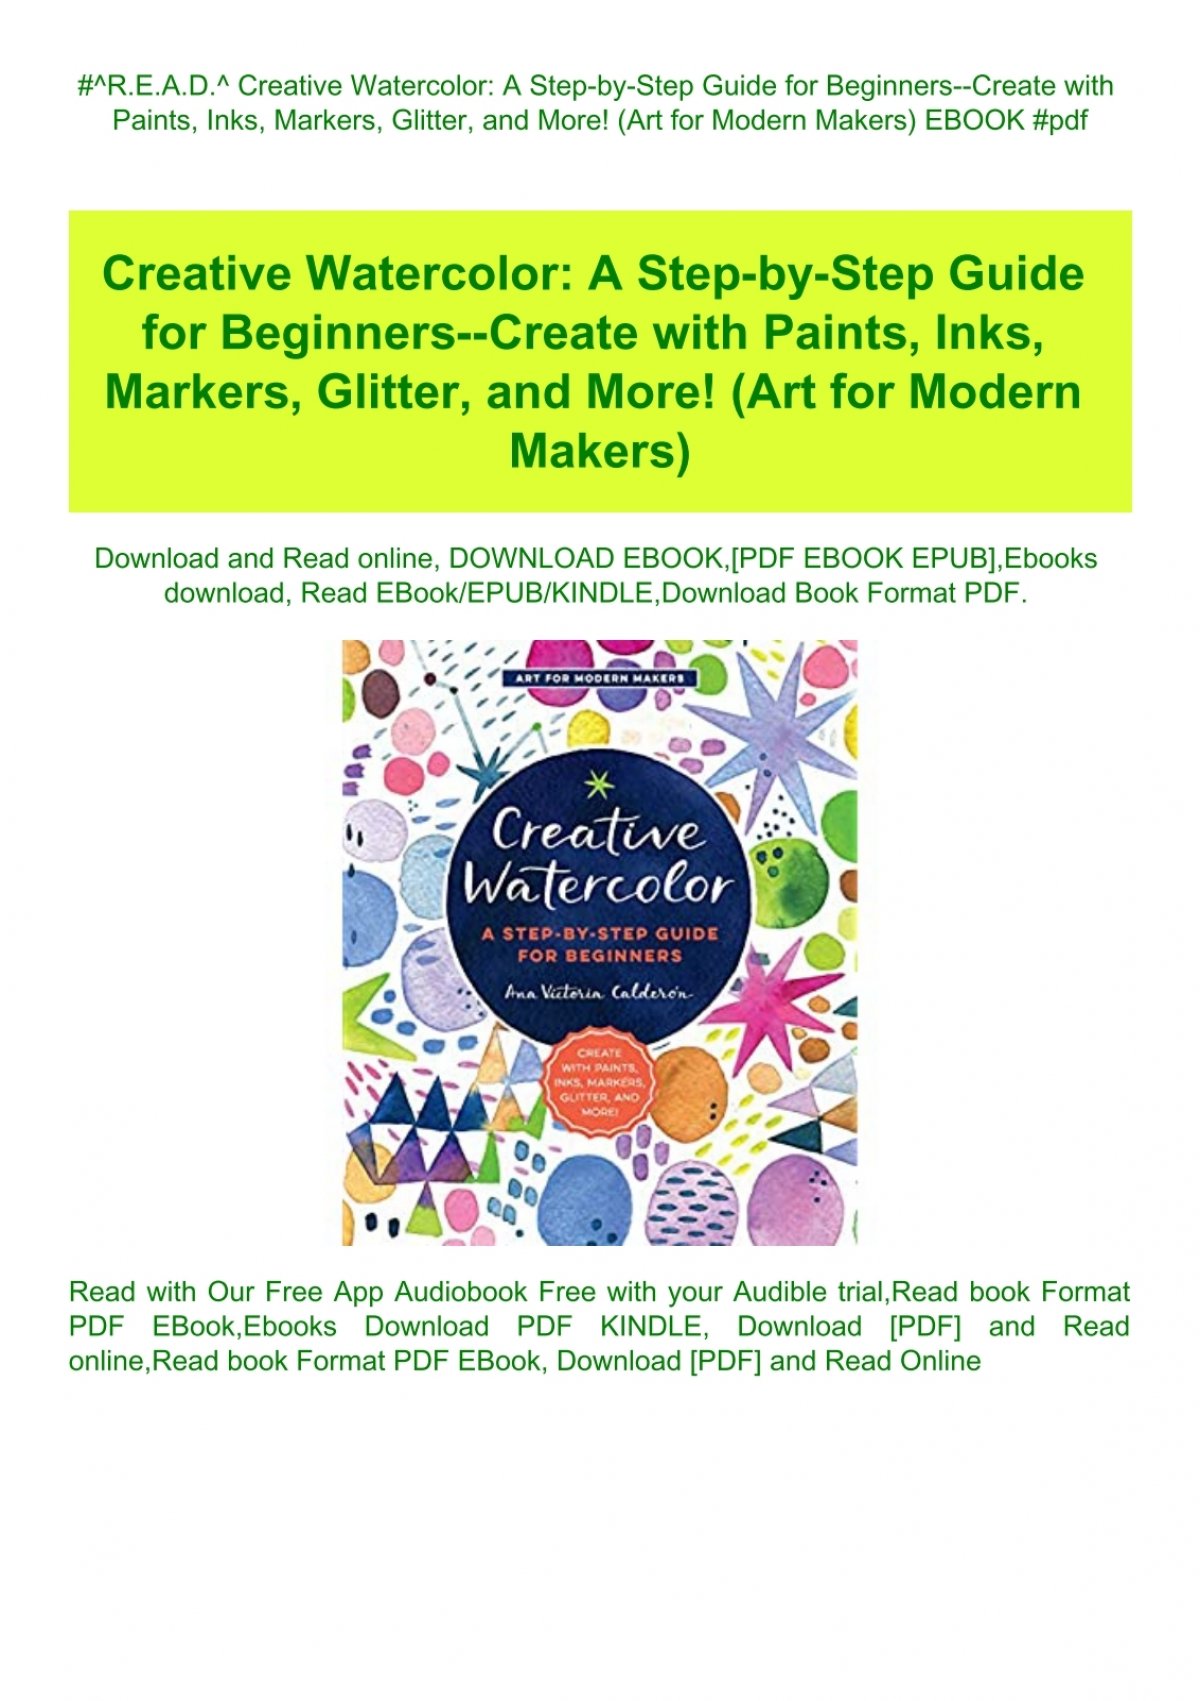 R.e.a.d.^ Creative Watercolor A Step-By-Step Guide For Beginners--Create With Paints Inks Markers Glitter And More! (Art For Modern Makers) Ebook # Pdf